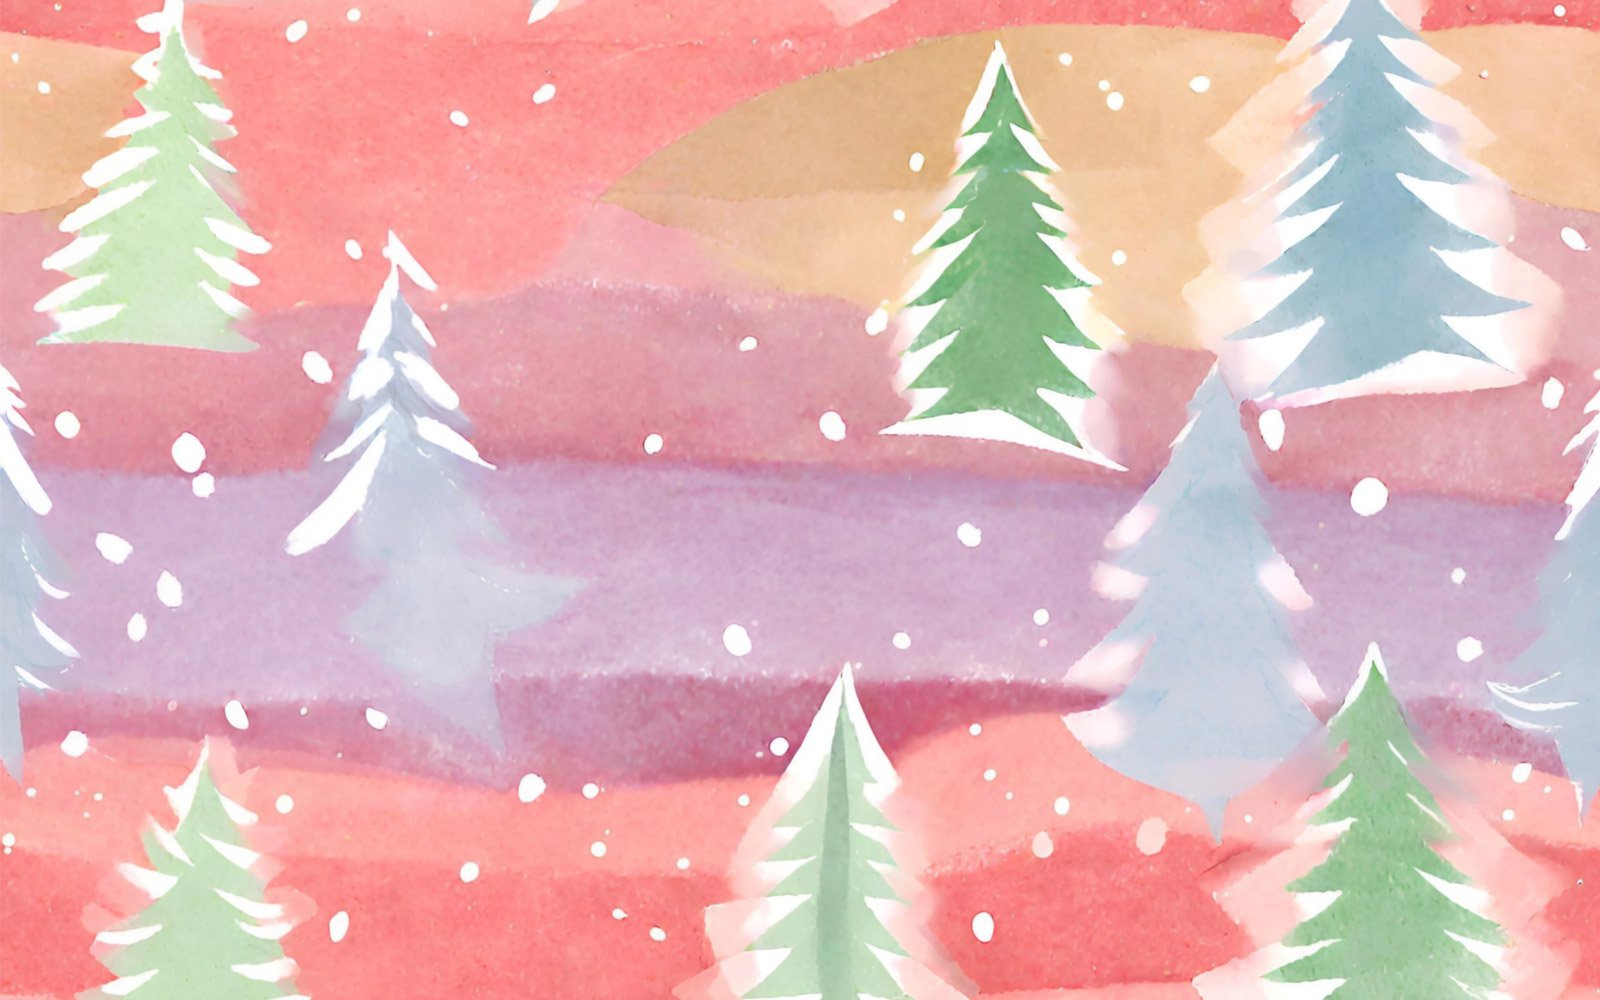 Watercolor christmas background with fir trees and snowflakes.